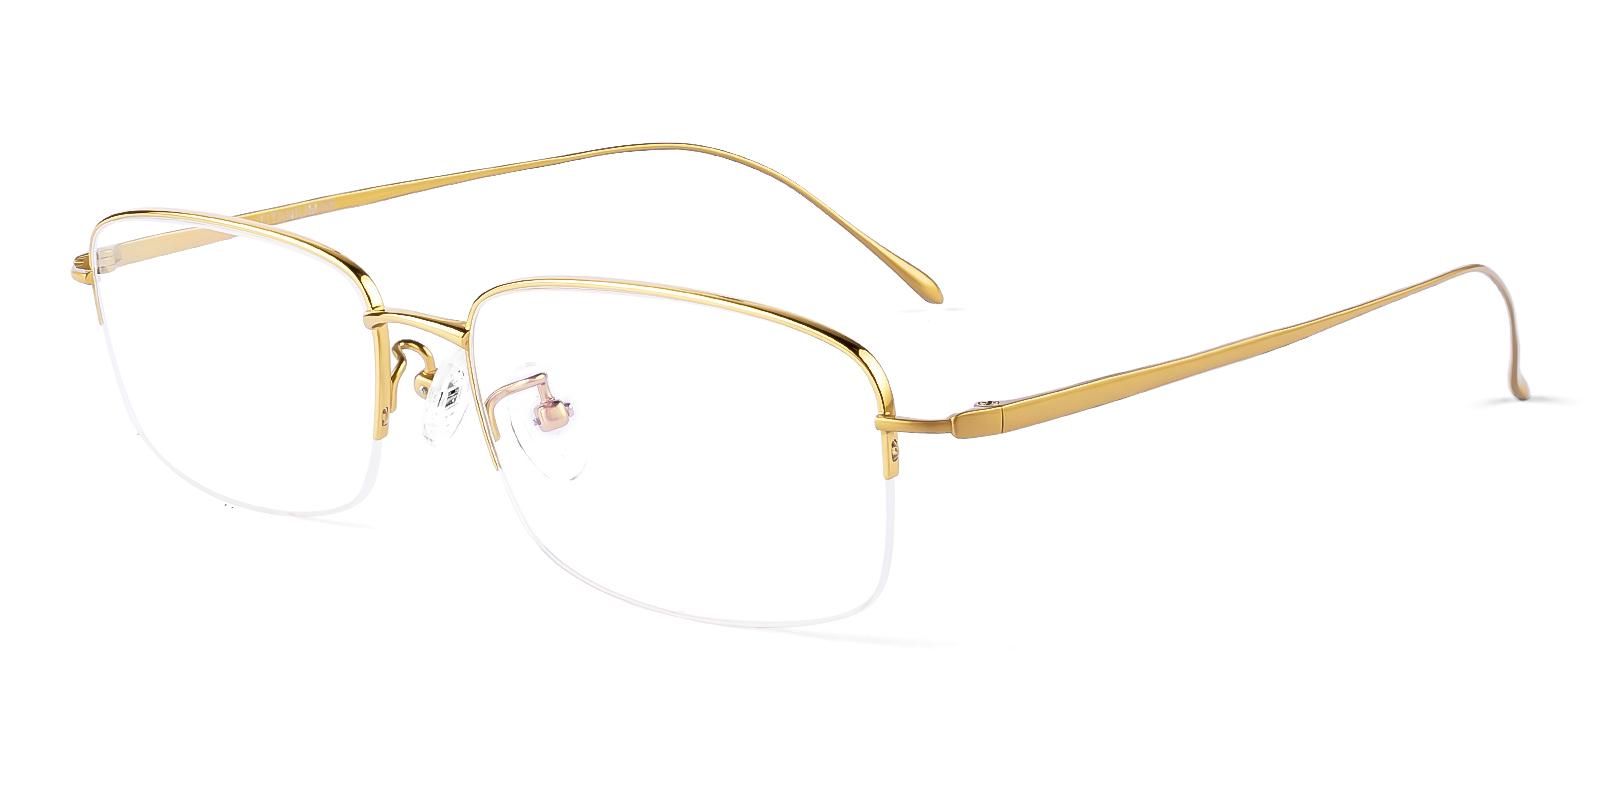 Indeedory Gold Titanium Eyeglasses , NosePads Frames from ABBE Glasses